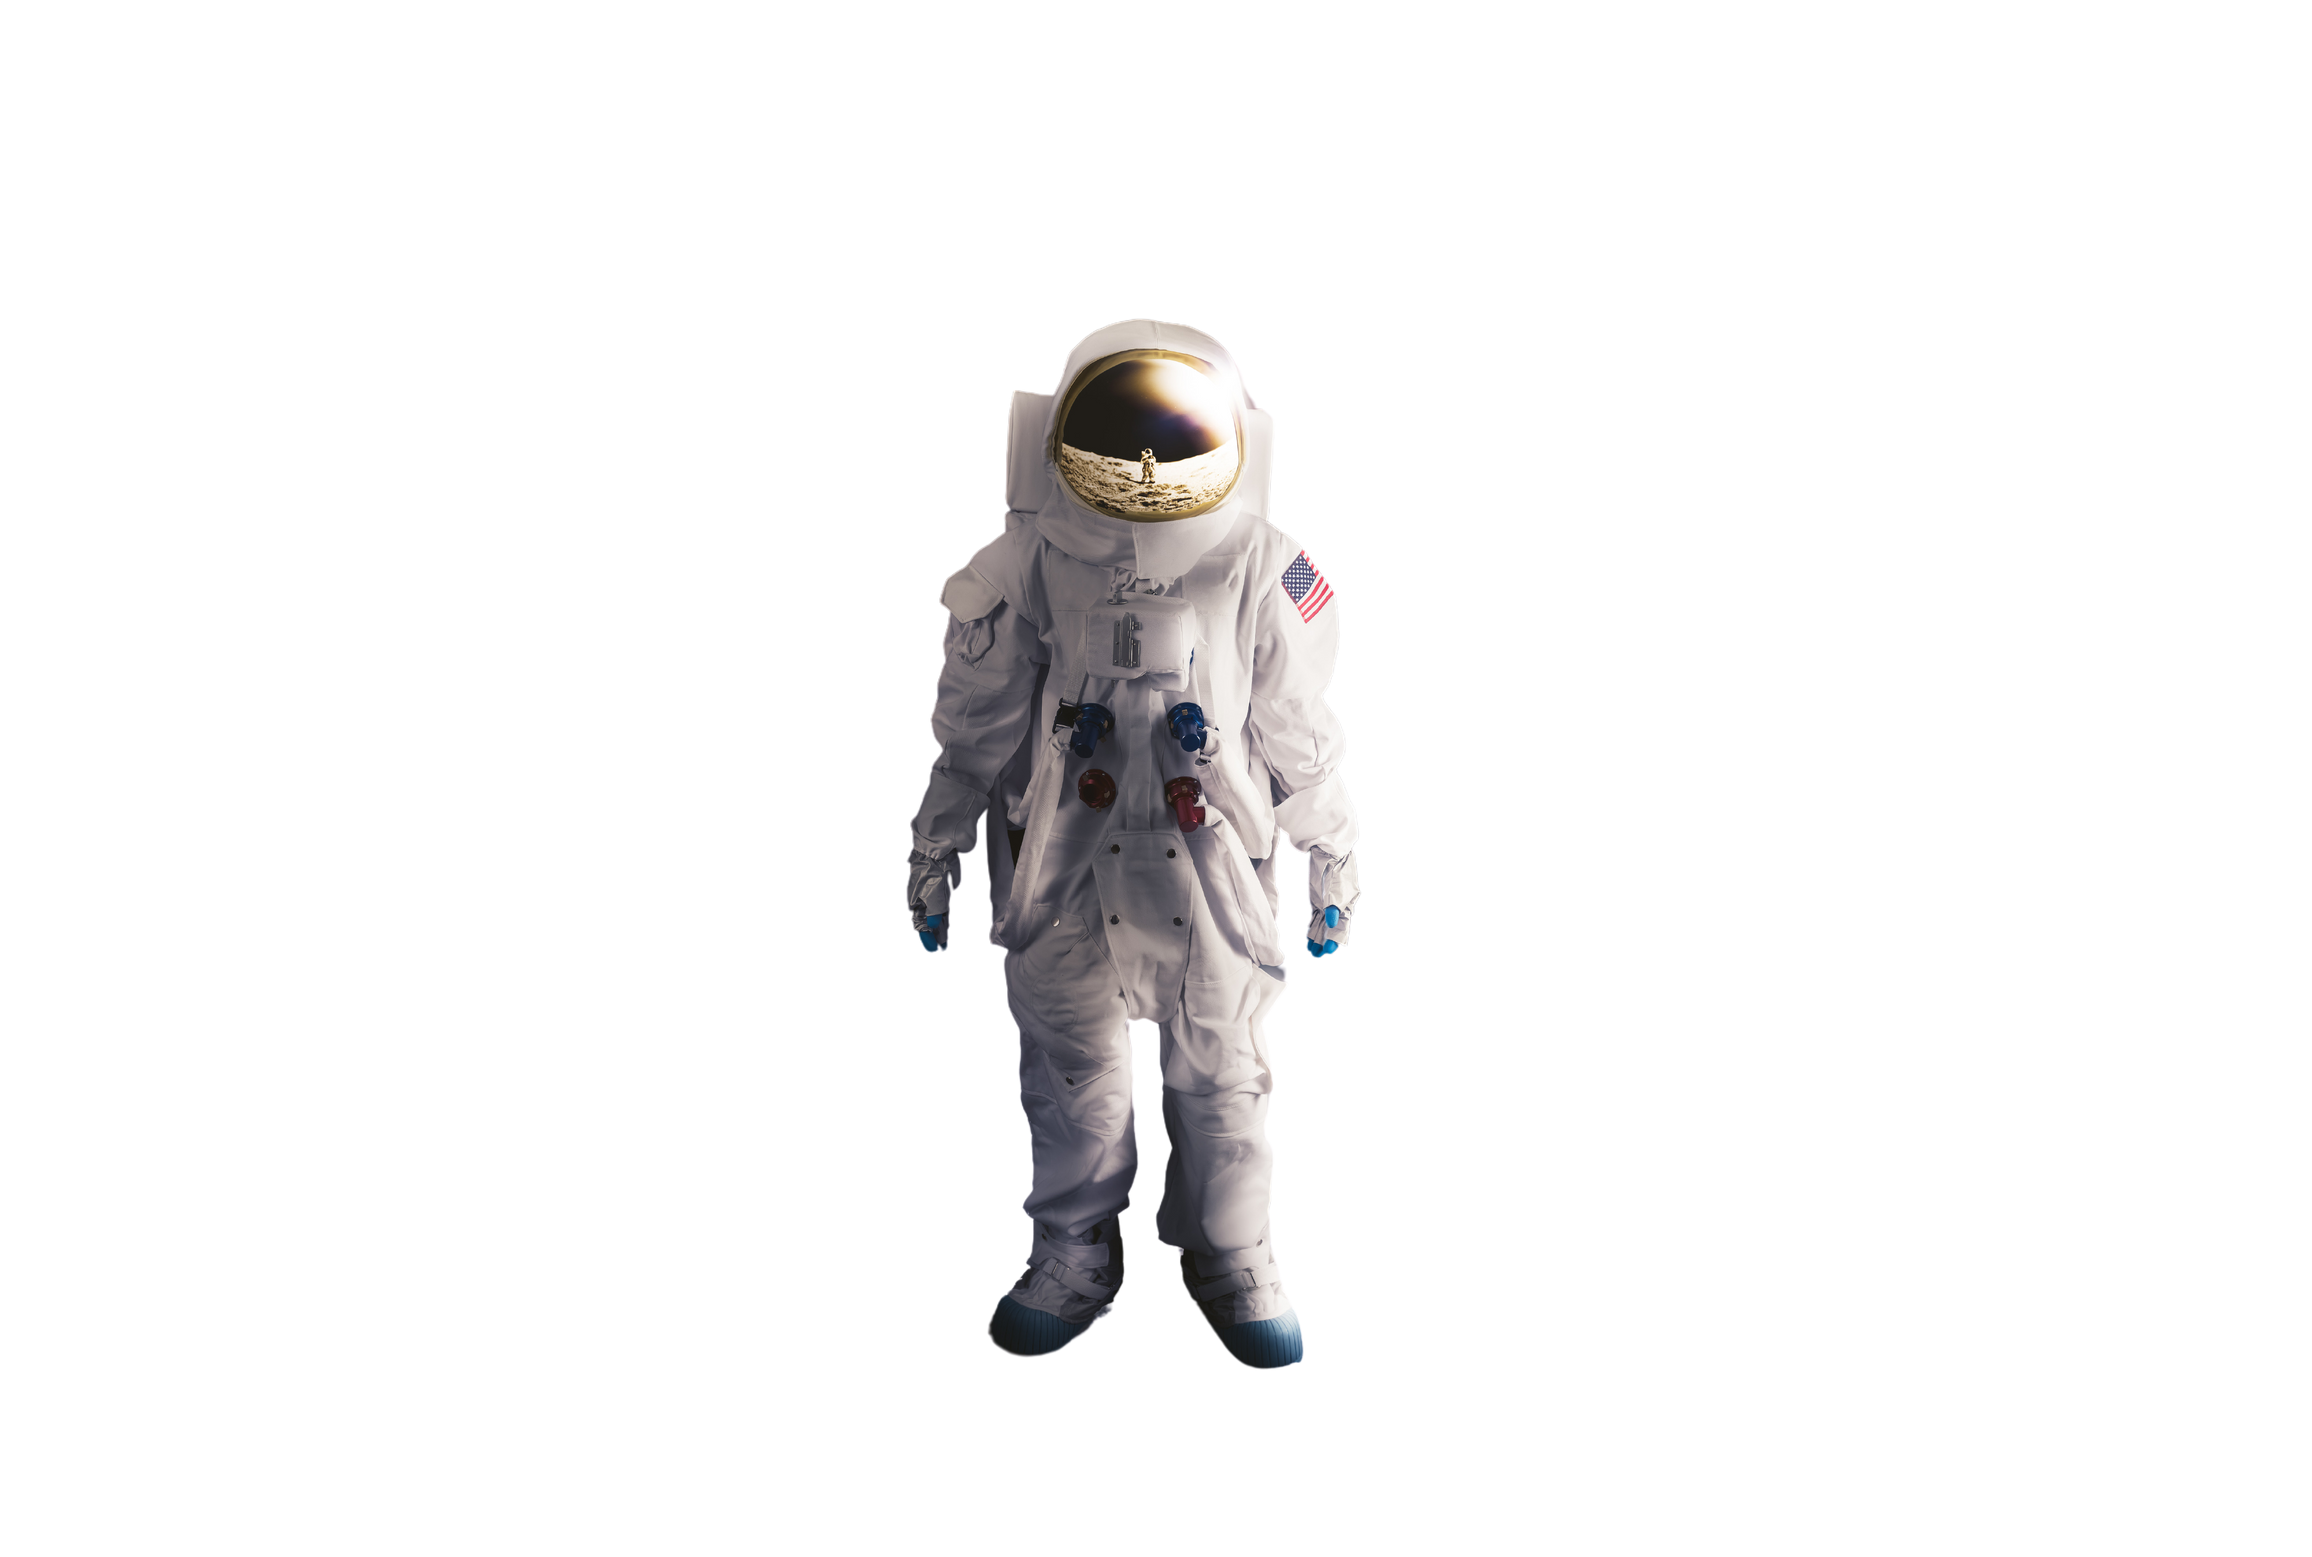 Astronaut standing on the moon surface